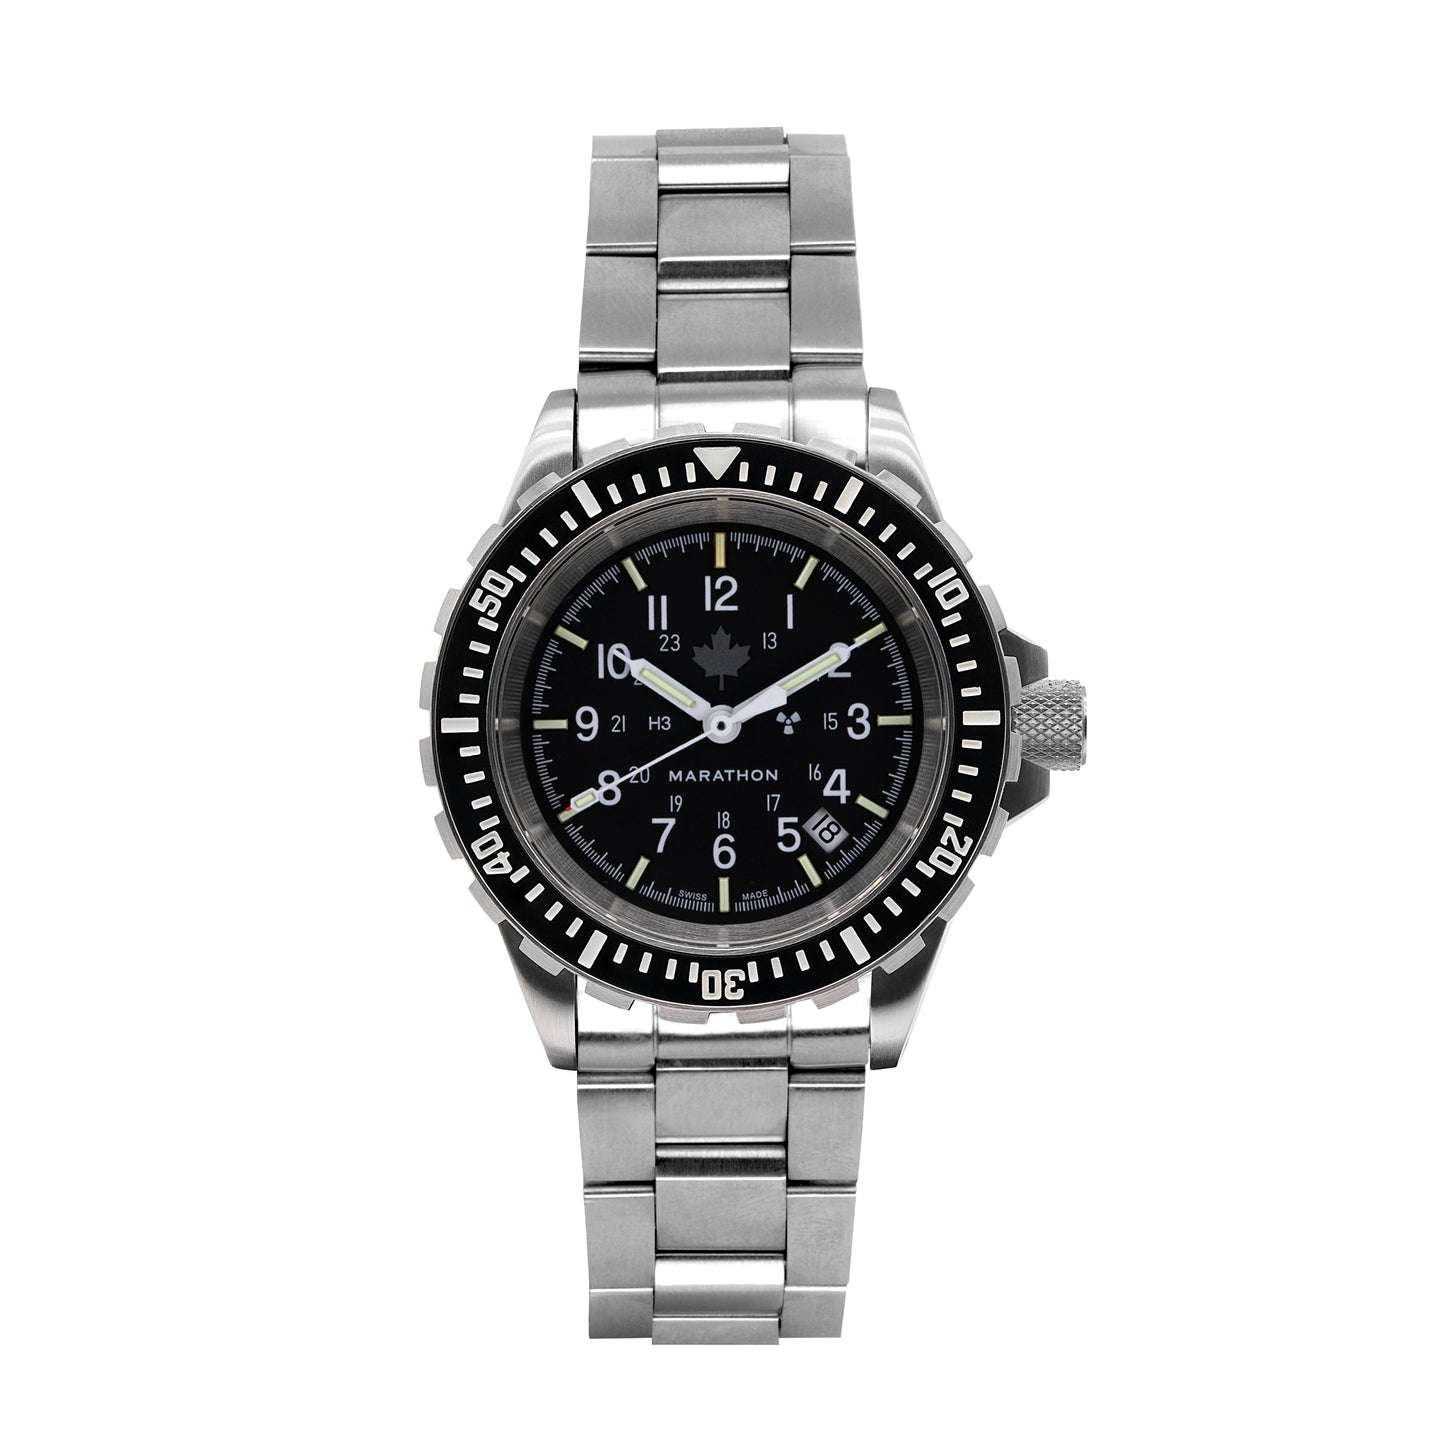 GREY MAPLE LARGE DIVER'S AUTOMATIC (GSAR) WITH STAINLESS STEEL BRACELET - 41MM